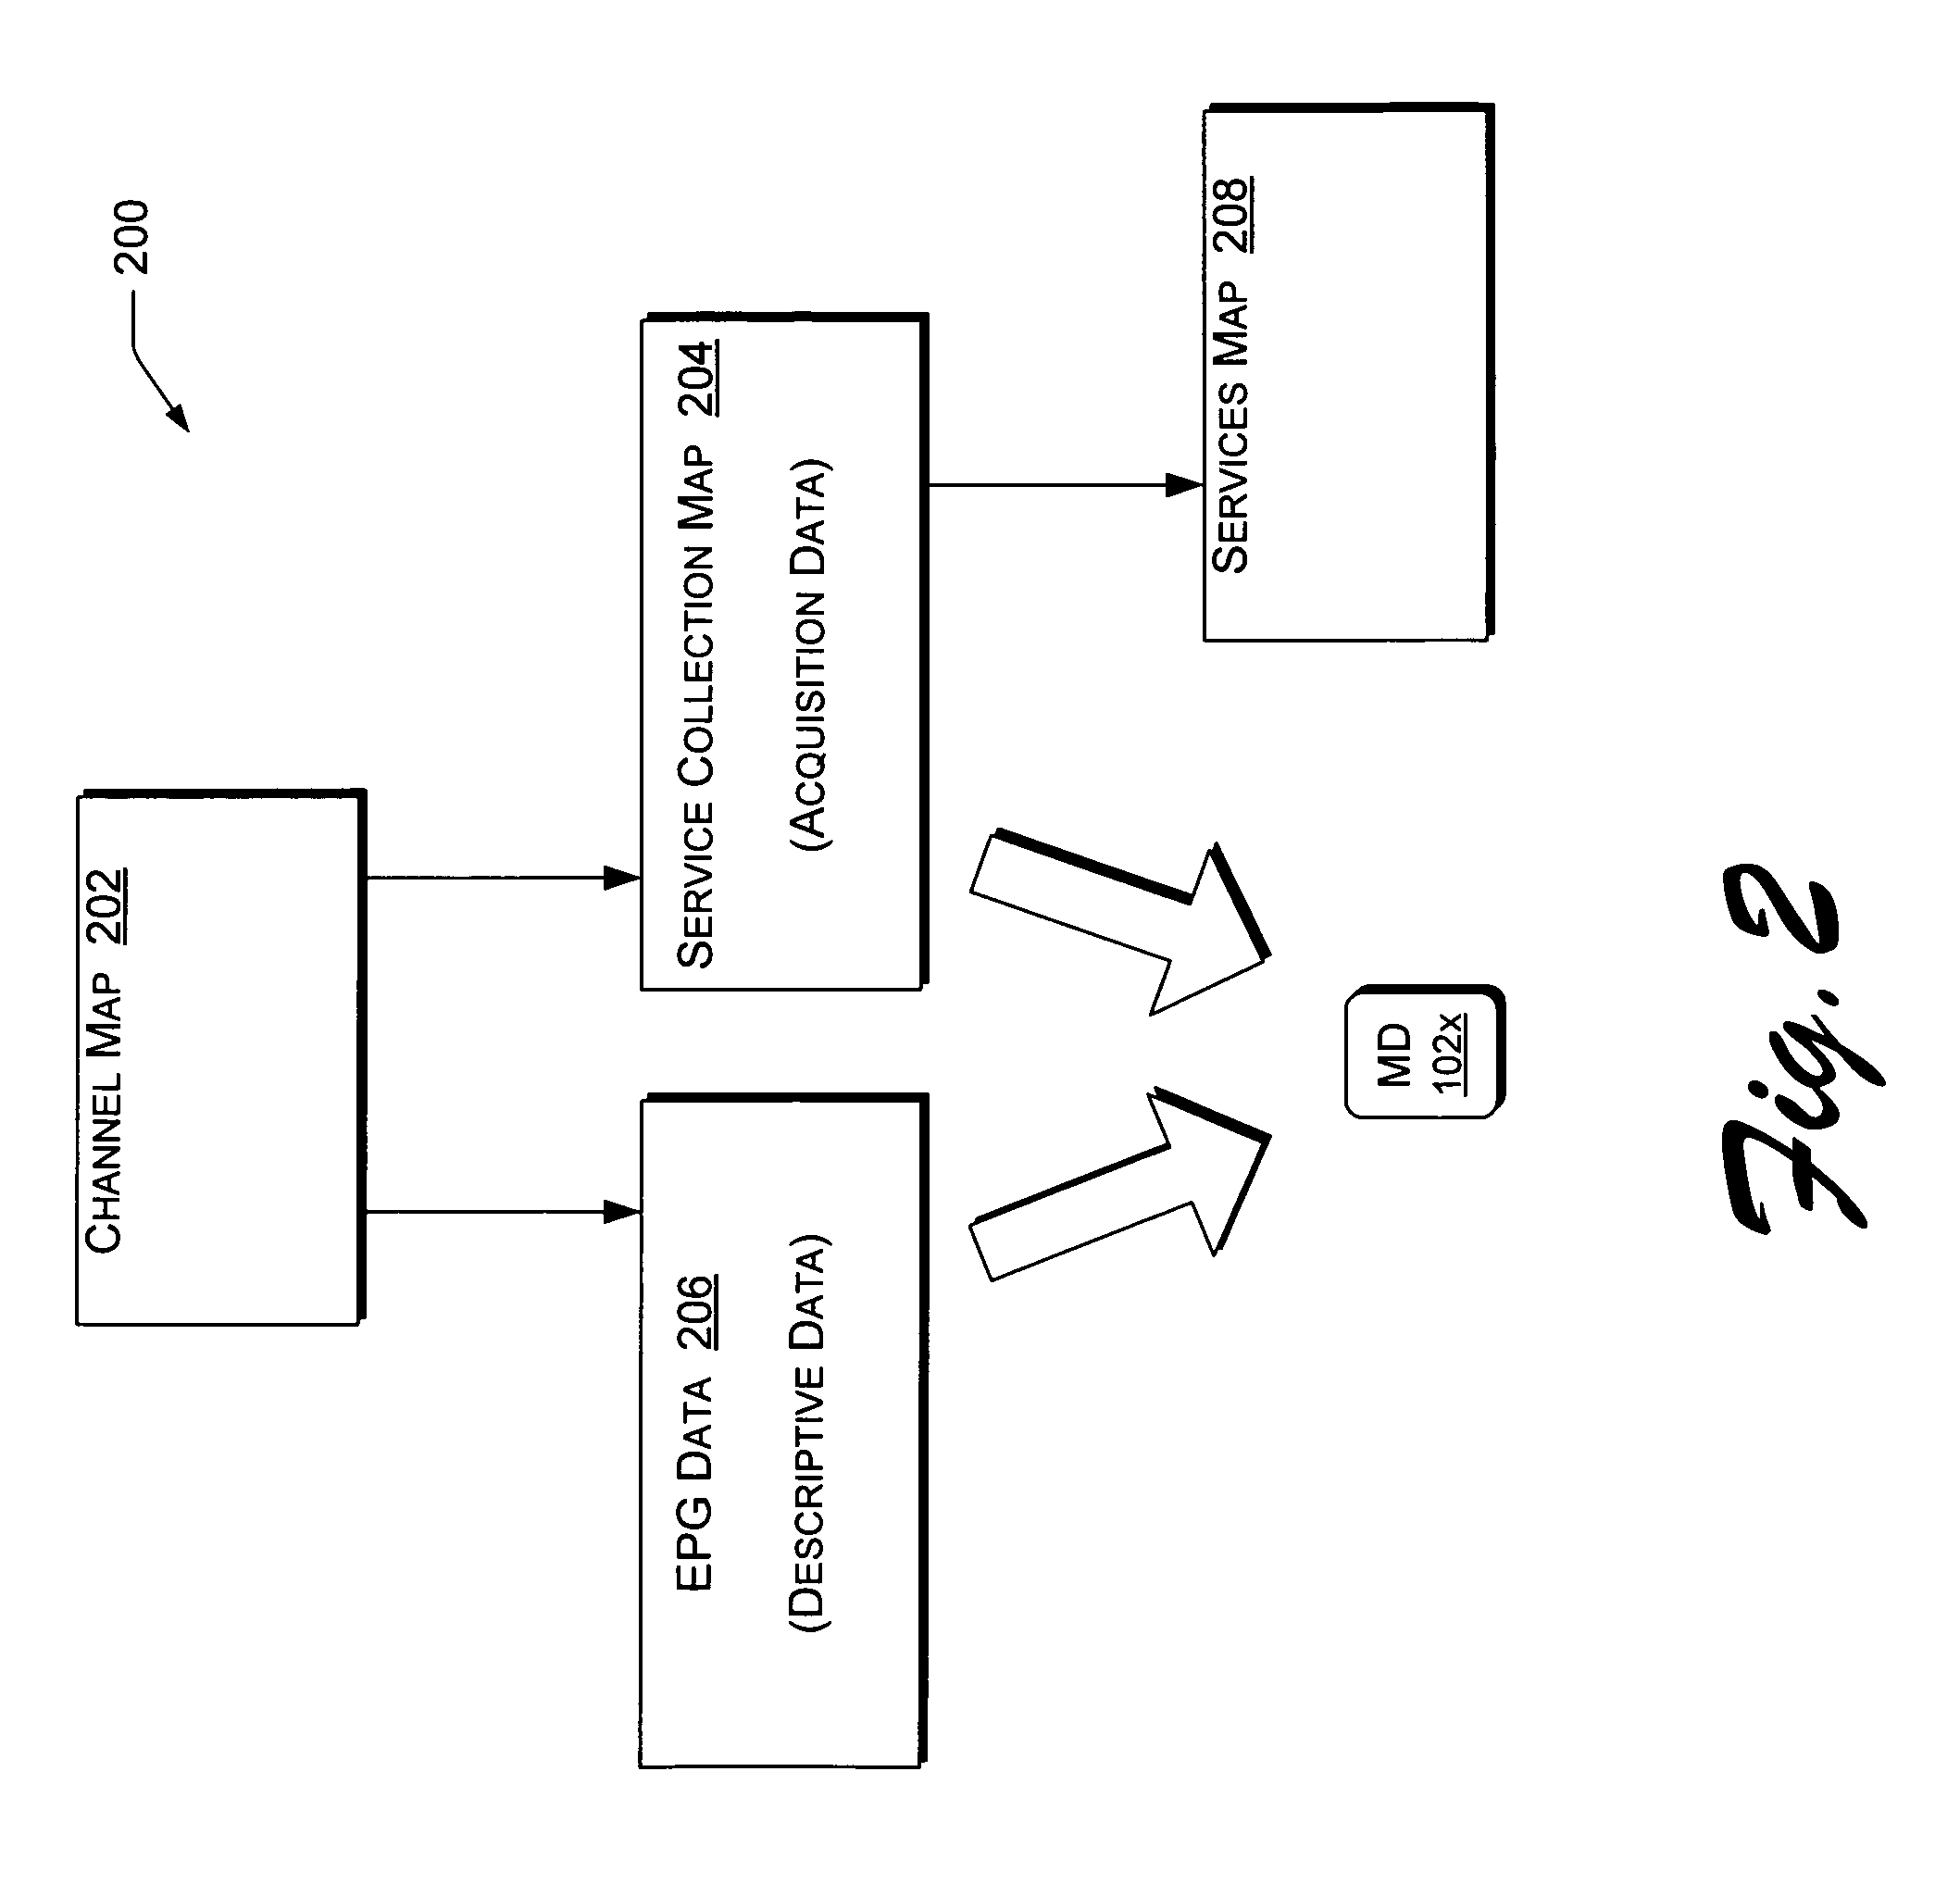 MediaDescription data structures for carrying descriptive content metadata and content acquisition data in multimedia systems